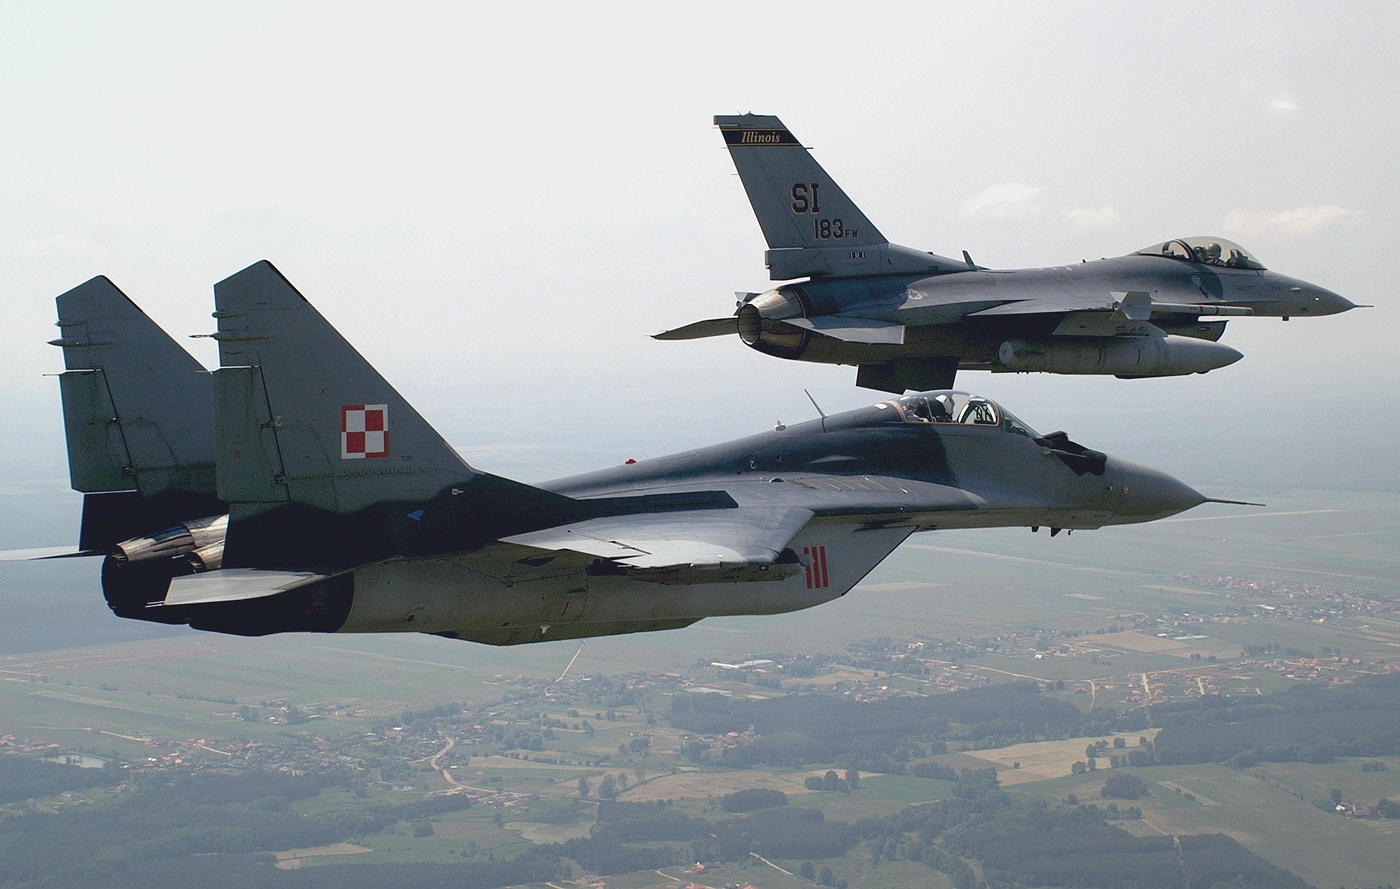 http://upload.wikimedia.org/wikipedia/commons/a/ac/U.S._F-16C_Fighting_Falcon_and_Polish_Mikoyan-Gurevich_MiG-29A_over_Krzesiny_air_base%2C_Poland_-_20050615.jpg